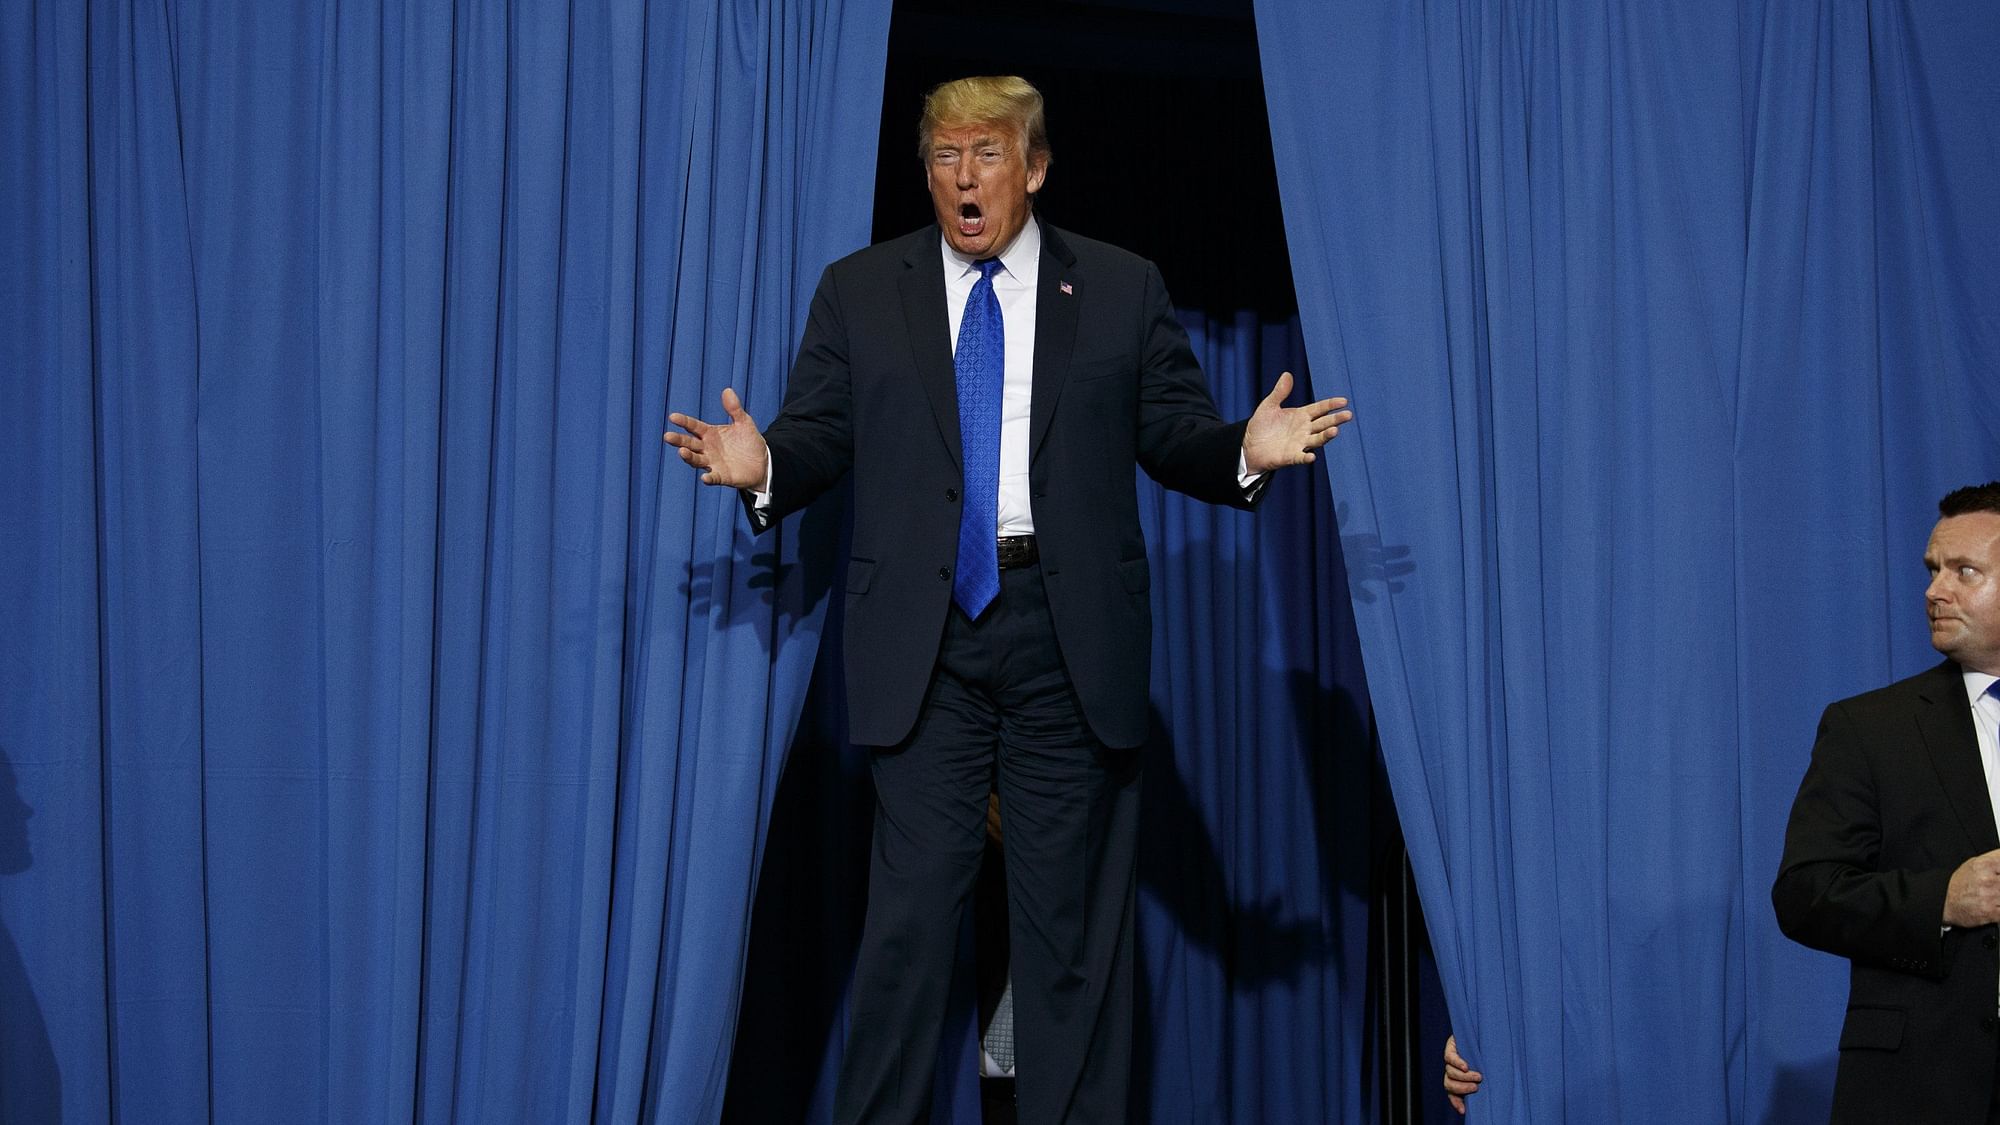 In this 2 October 2018 file photo, President Donald Trump arrives to speak at a campaign rally at the Landers Center Arena in Southaven.